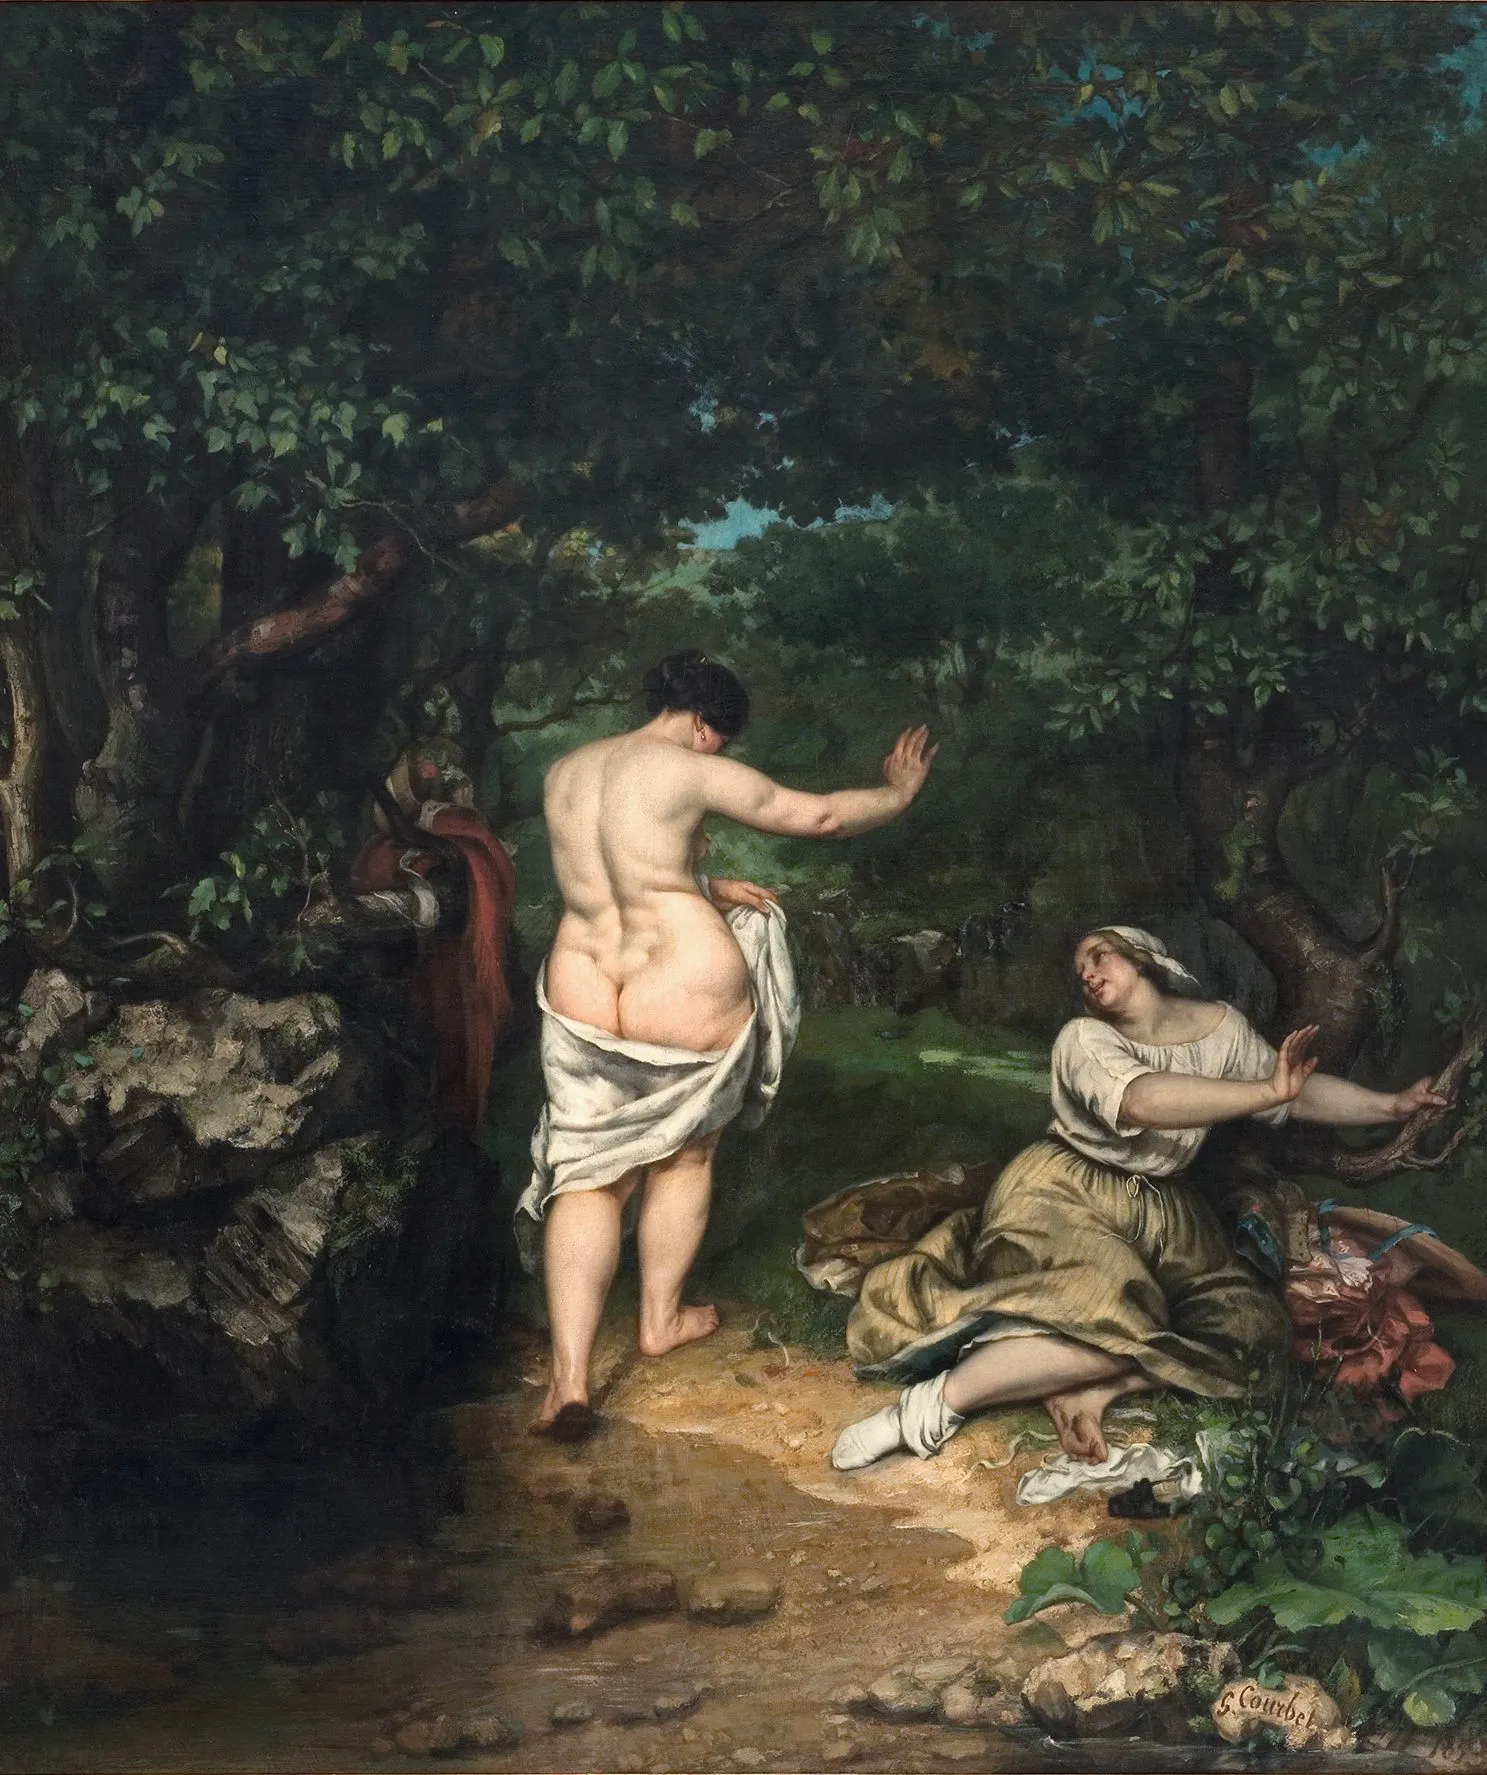 Gustave Courbet, Les Baigneuses, 1853